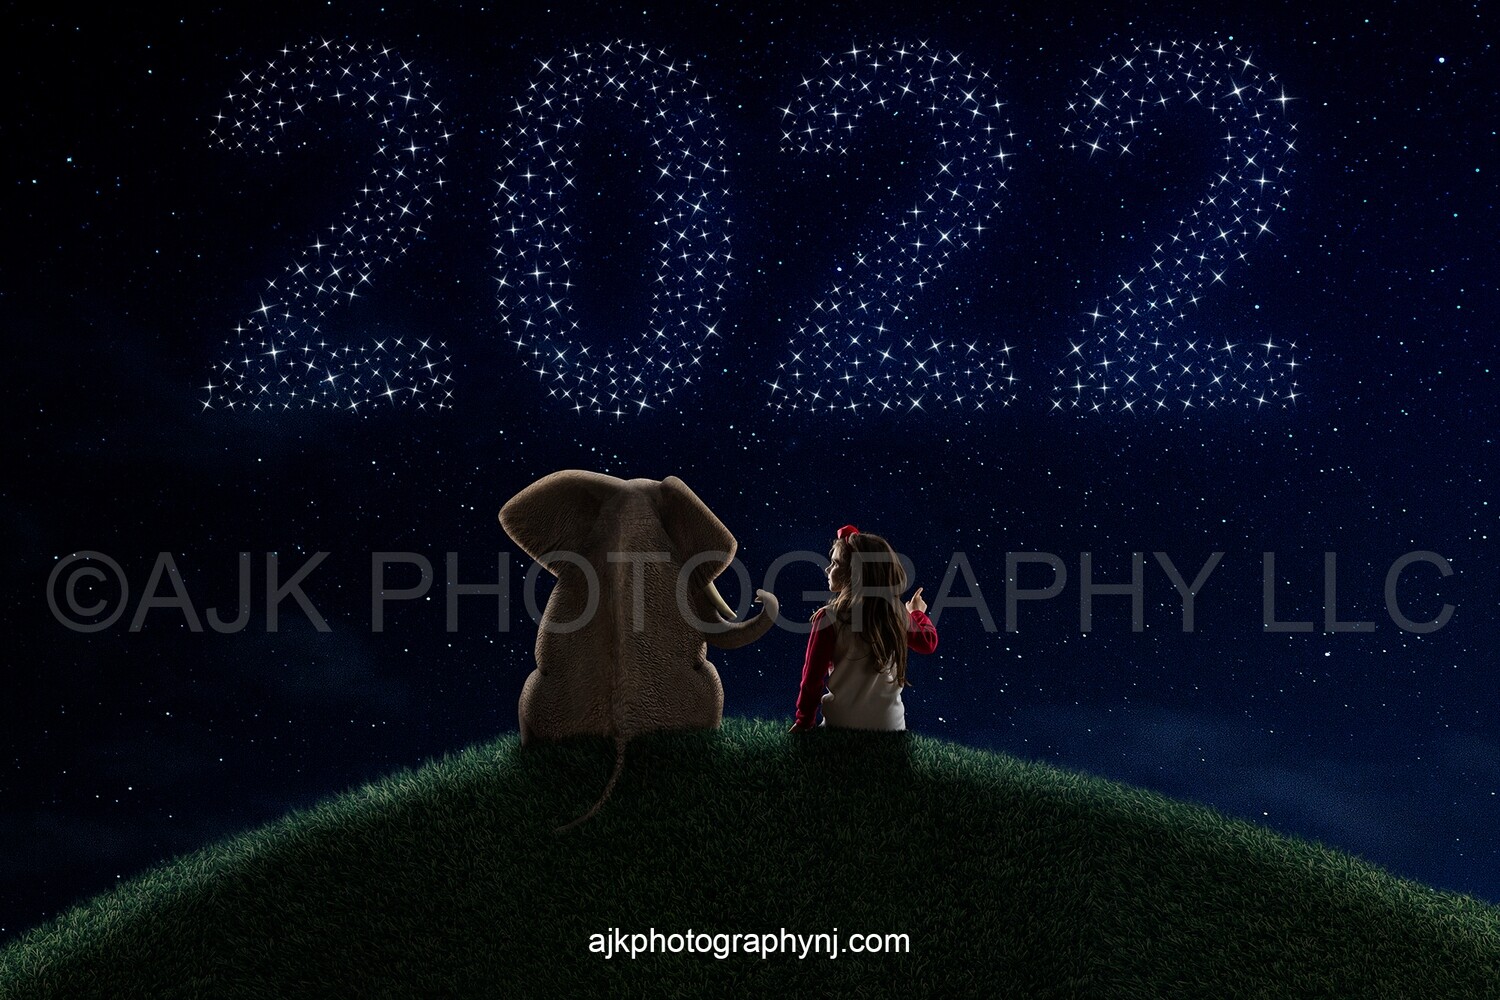 2022 new years digital background, elephant on grassy hill, stars lit up writing 2022 in night sky, digital background